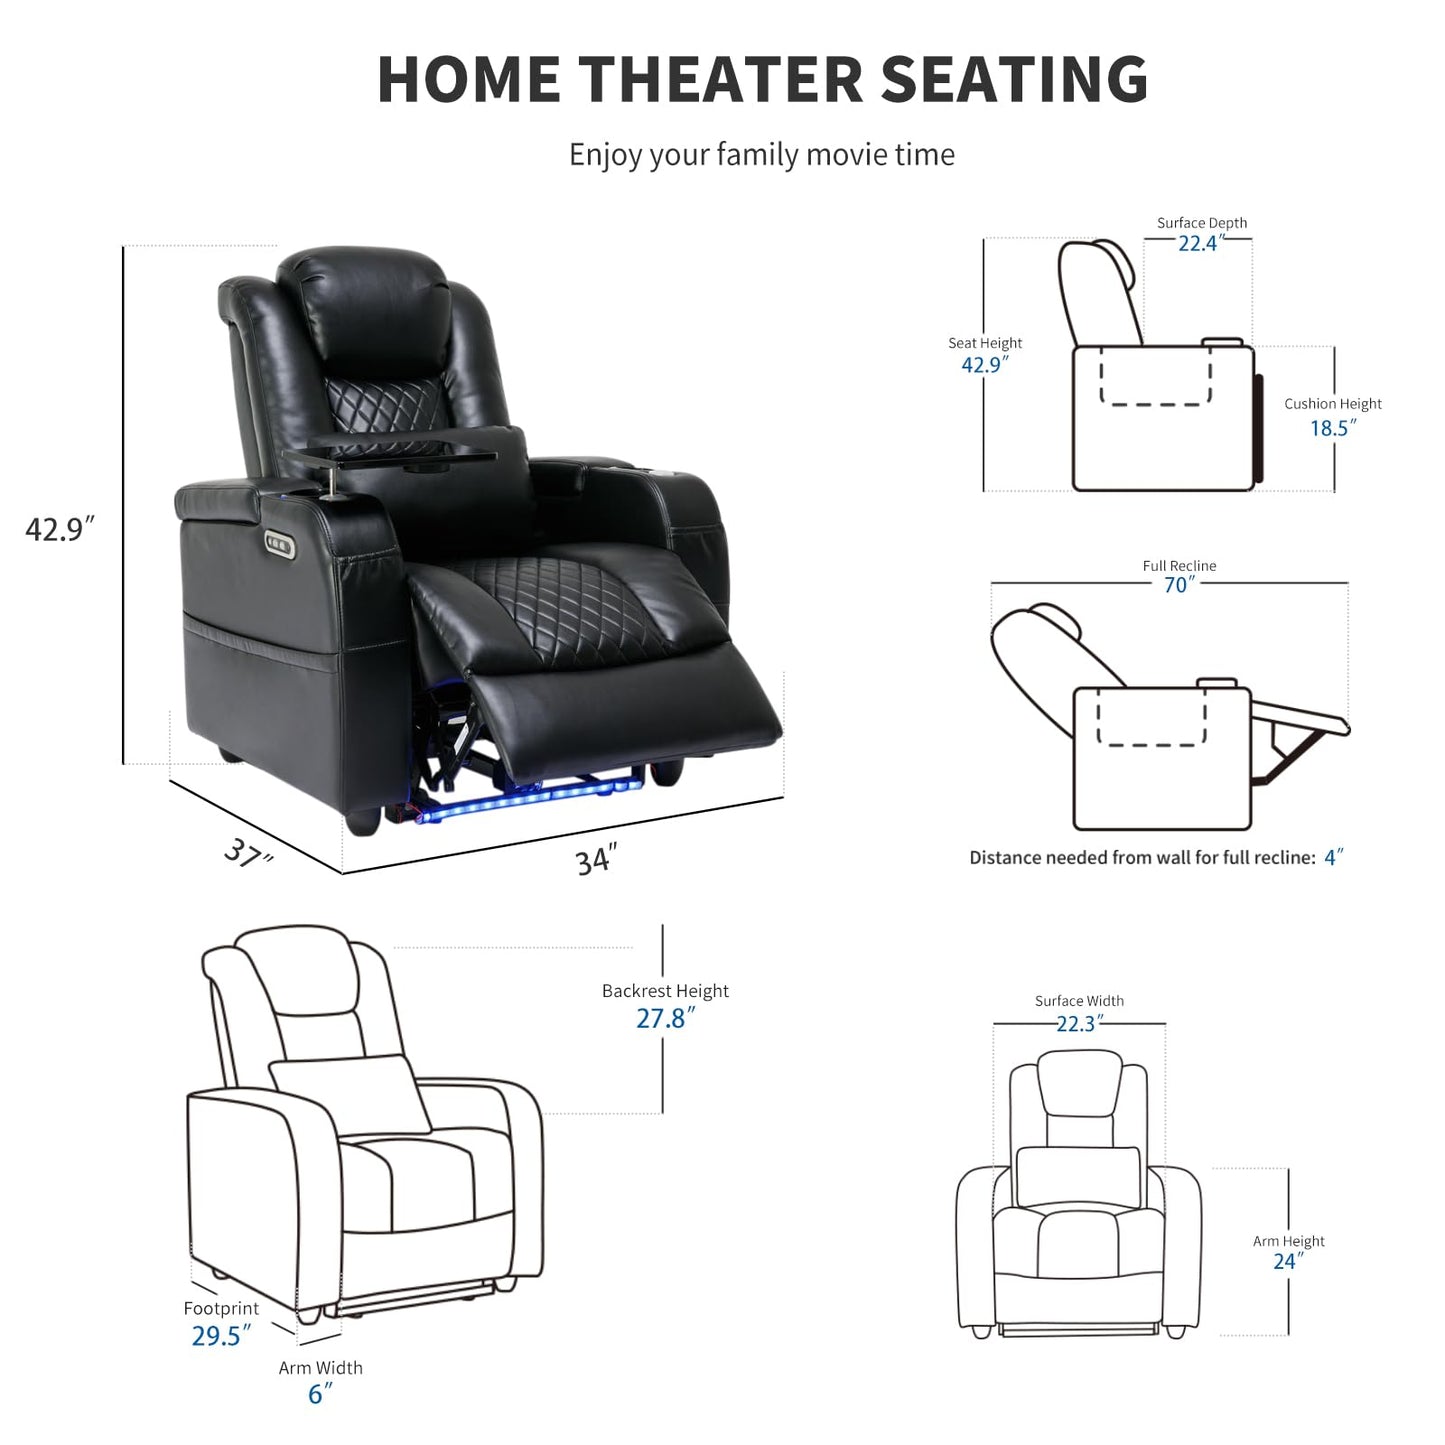 Airadlis Home Theater Seating Seats, Game Movie Theater Chairs Theater Recliner Sofa with 7 Colors Ambient Lighting, Lumbar Pillow, Side Pocket, Tray Table, Power Recline, Black